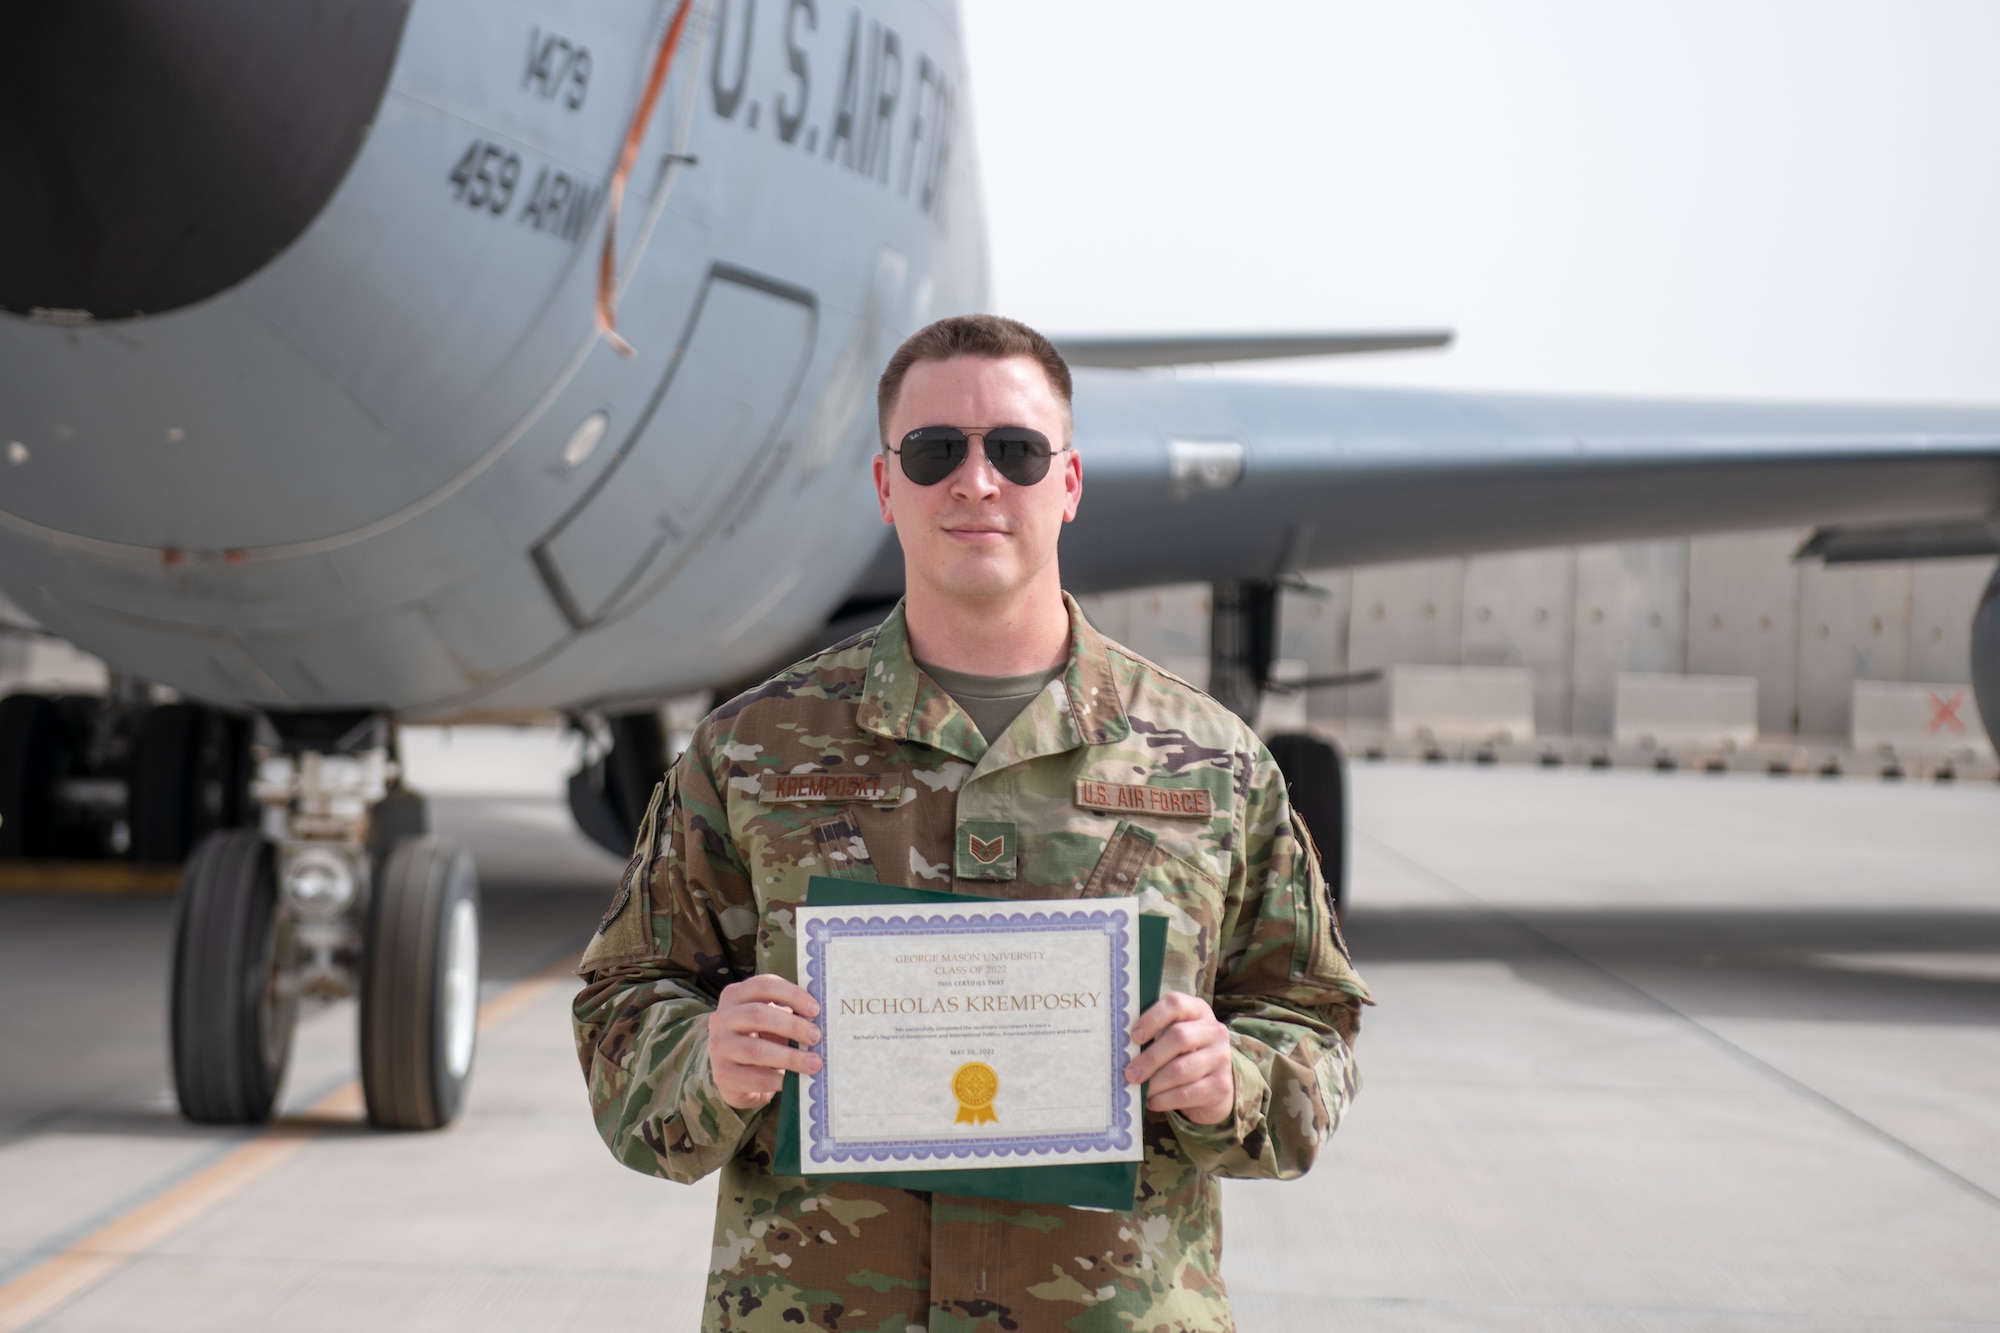 U.S. Air Force Staff Sgt. Nicholas Kremposky poses in front of a KC-135 with his college diploma on Al Udeid Air Base, Qatar, May 26, 2022. Kremposky graduated with his bachelor's degree during his deployment on AUAB, and is currently pursuing a master's degree. (U.S. Air National Guard photo by Airman 1st Class Constantine Bambakidis)